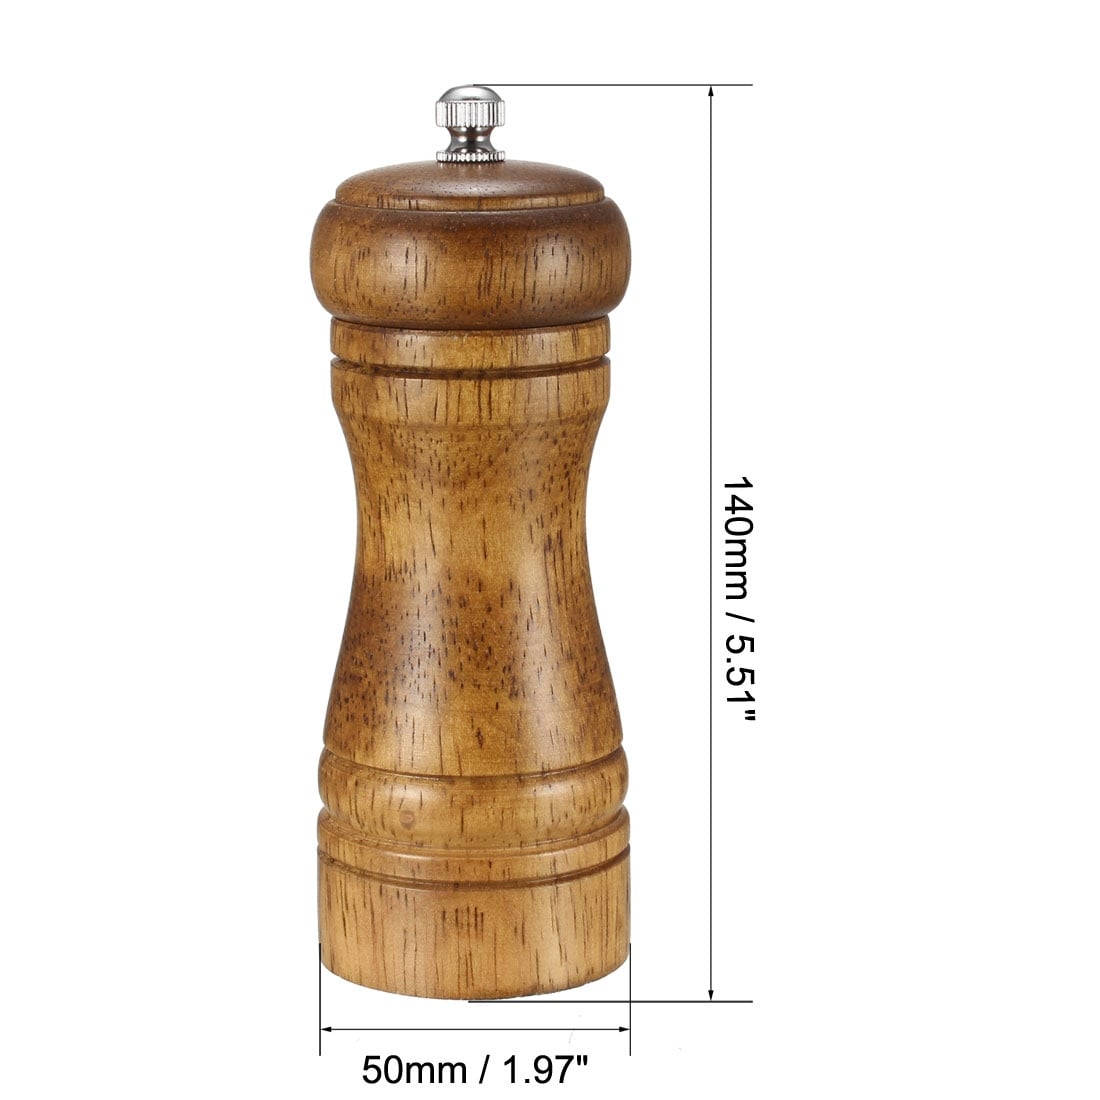 https://ak1.ostkcdn.com/images/products/is/images/direct/f279d00e0db1df061f41fc06deabf14769c5efd8/Pepper-Grinder-5-inch-Solid-Wood-Adjustable-Coarseness-Salt-and-Pepper-Mill.jpg